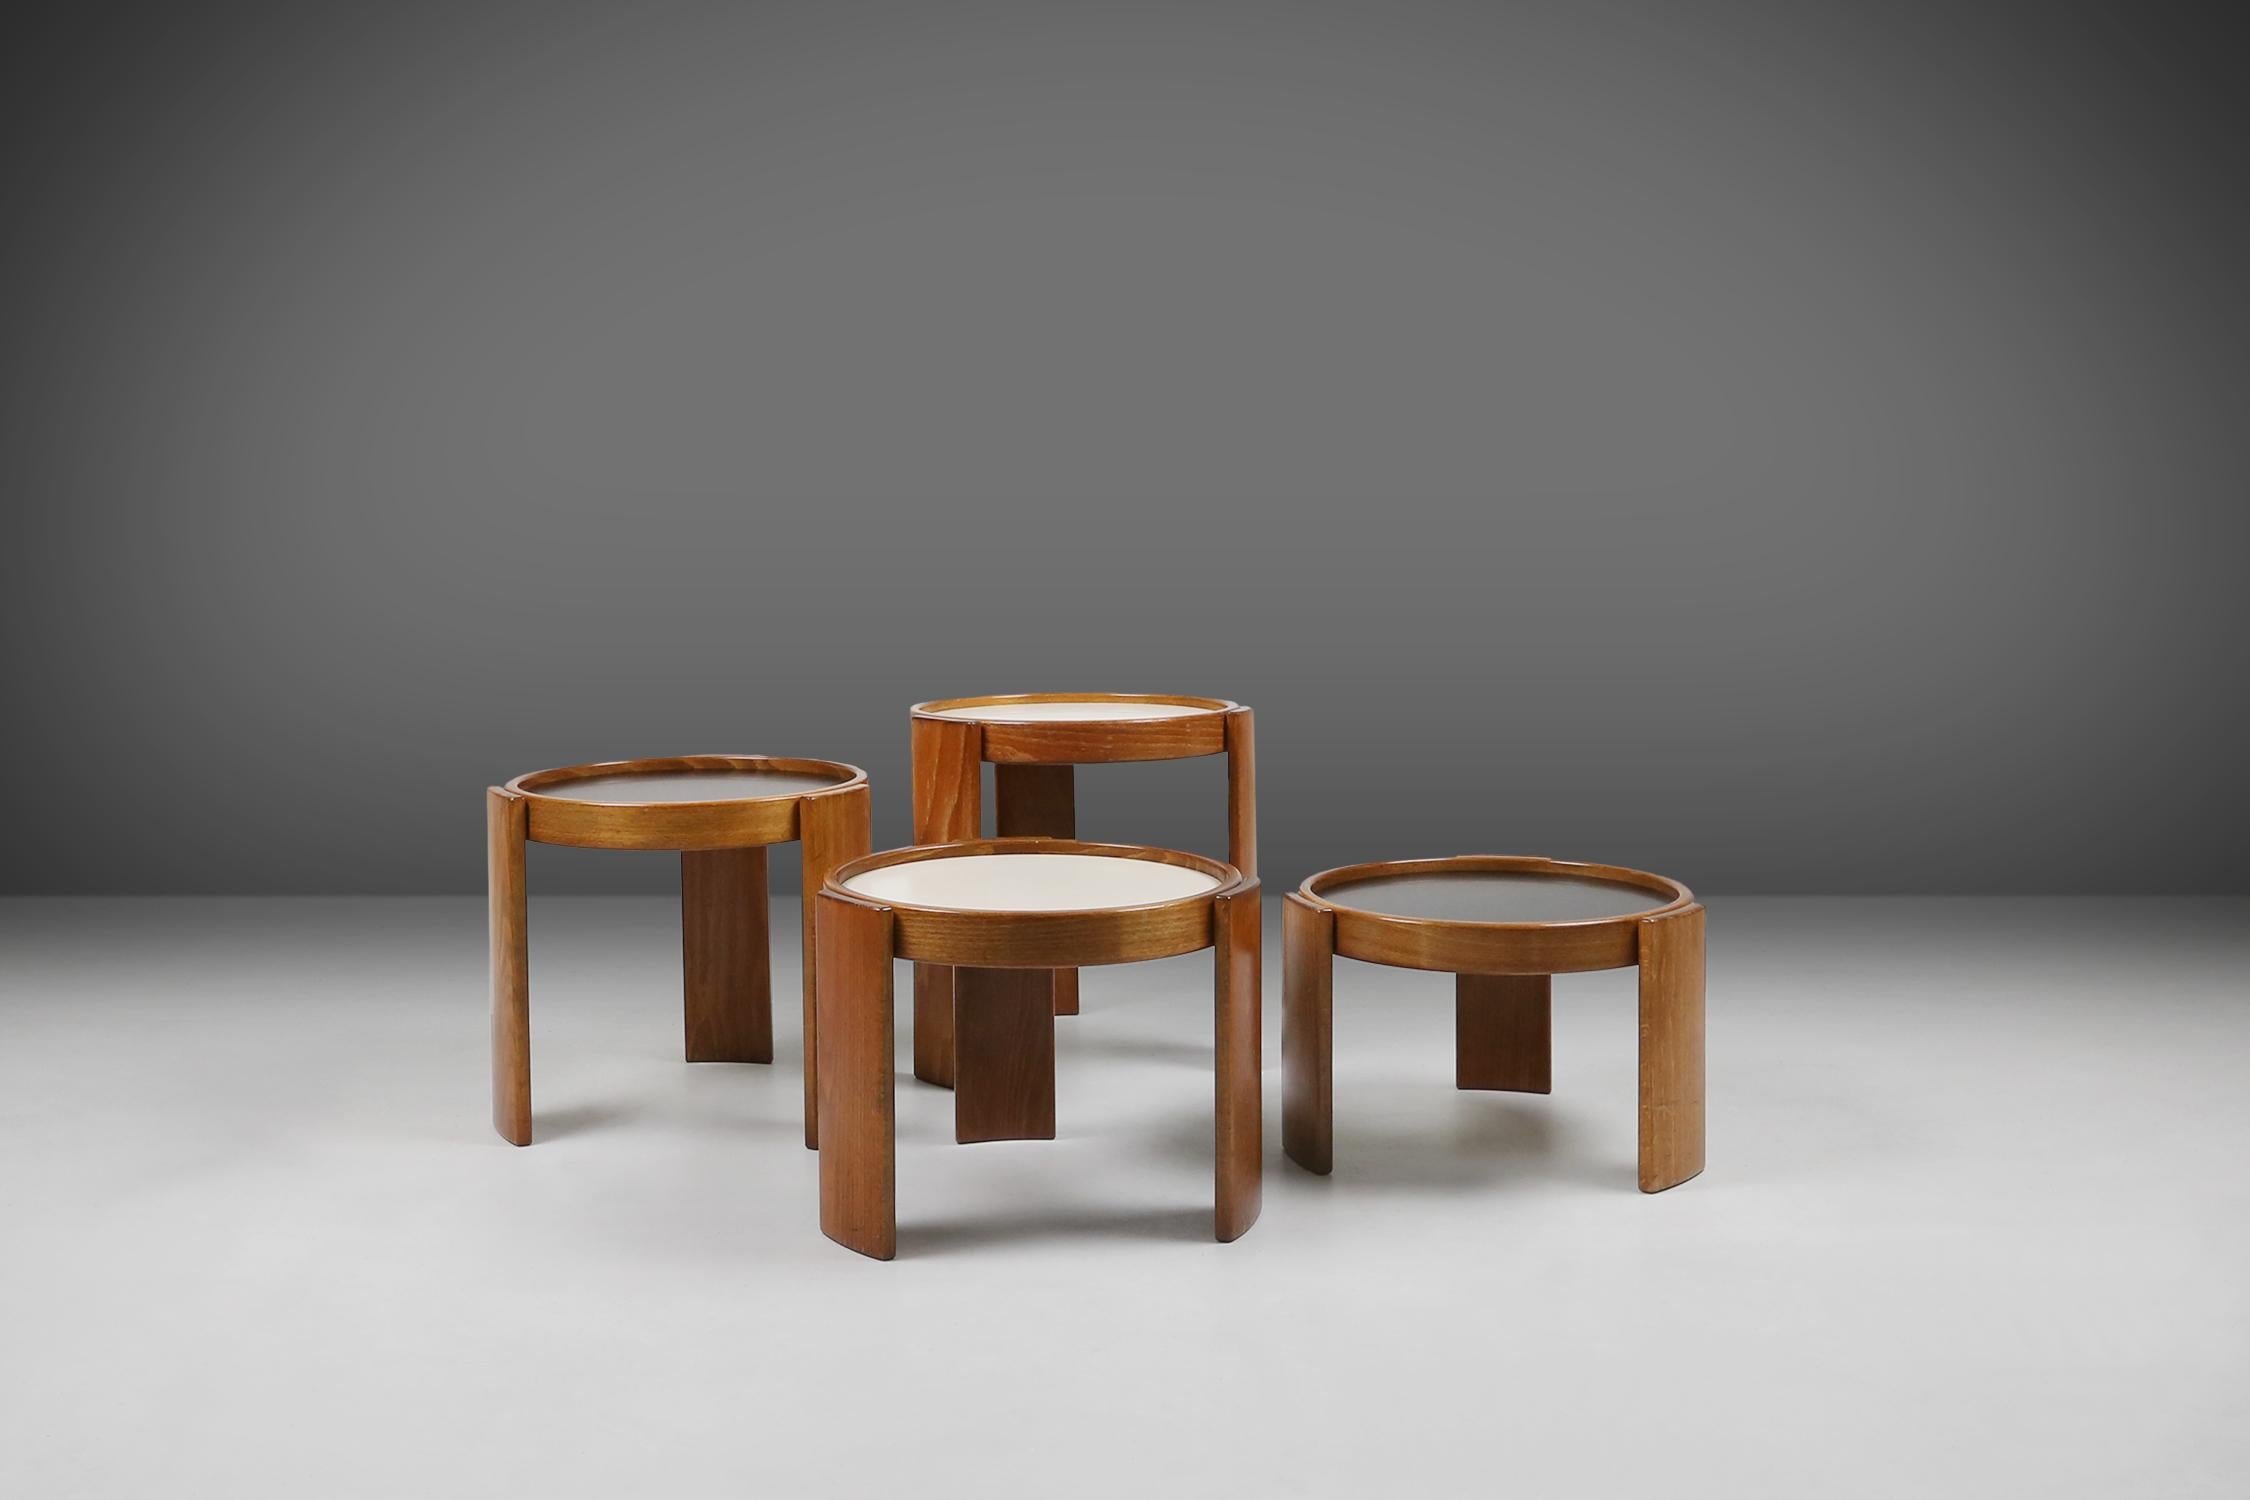 Italian Gianfranco Frattini for Casina, Italy, 1966, early edition wooden nesting tables For Sale